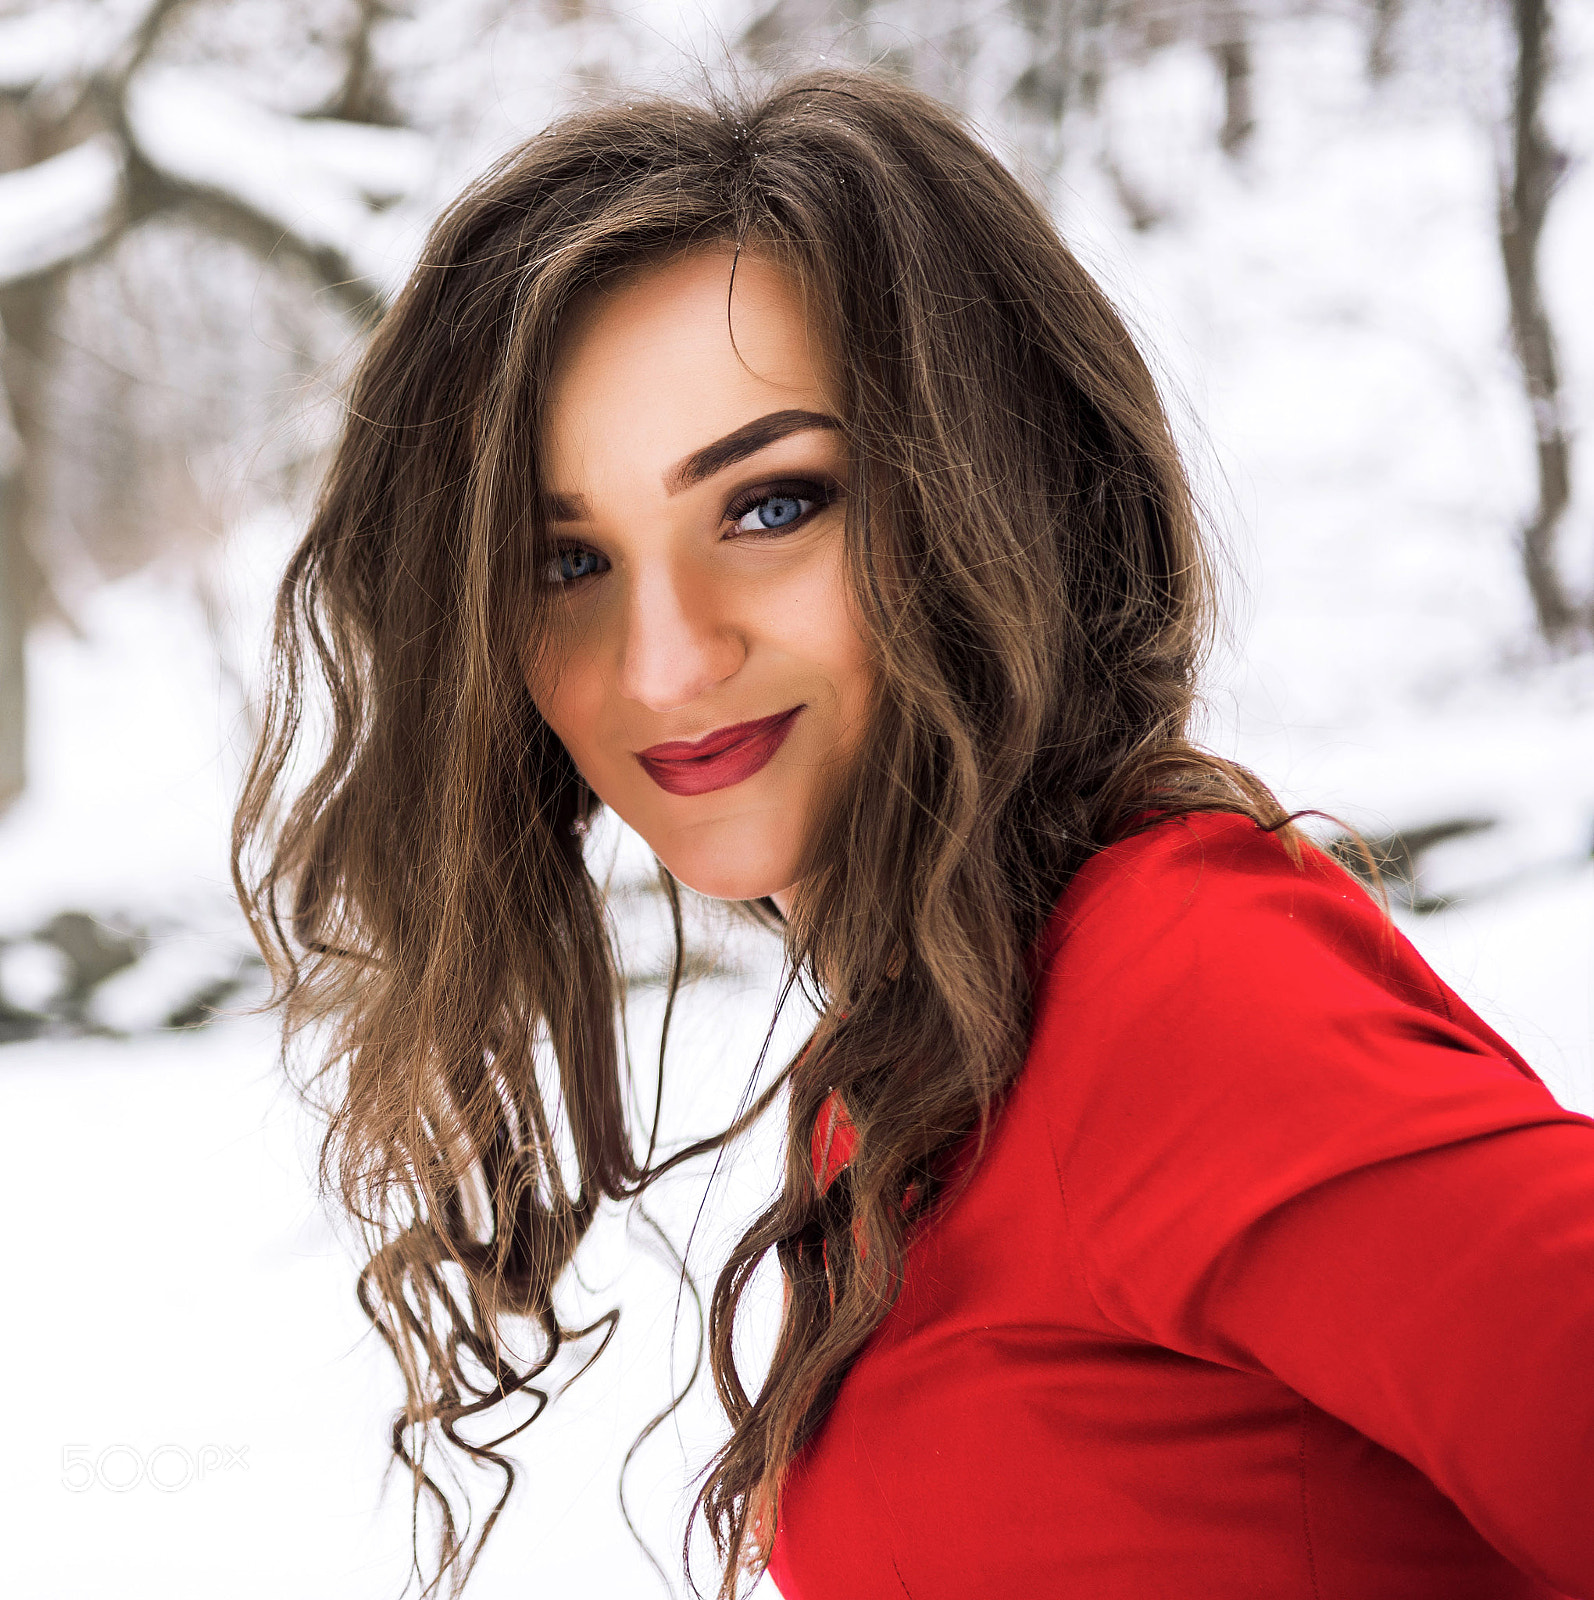 Nikon D810 sample photo. Lady in red photography